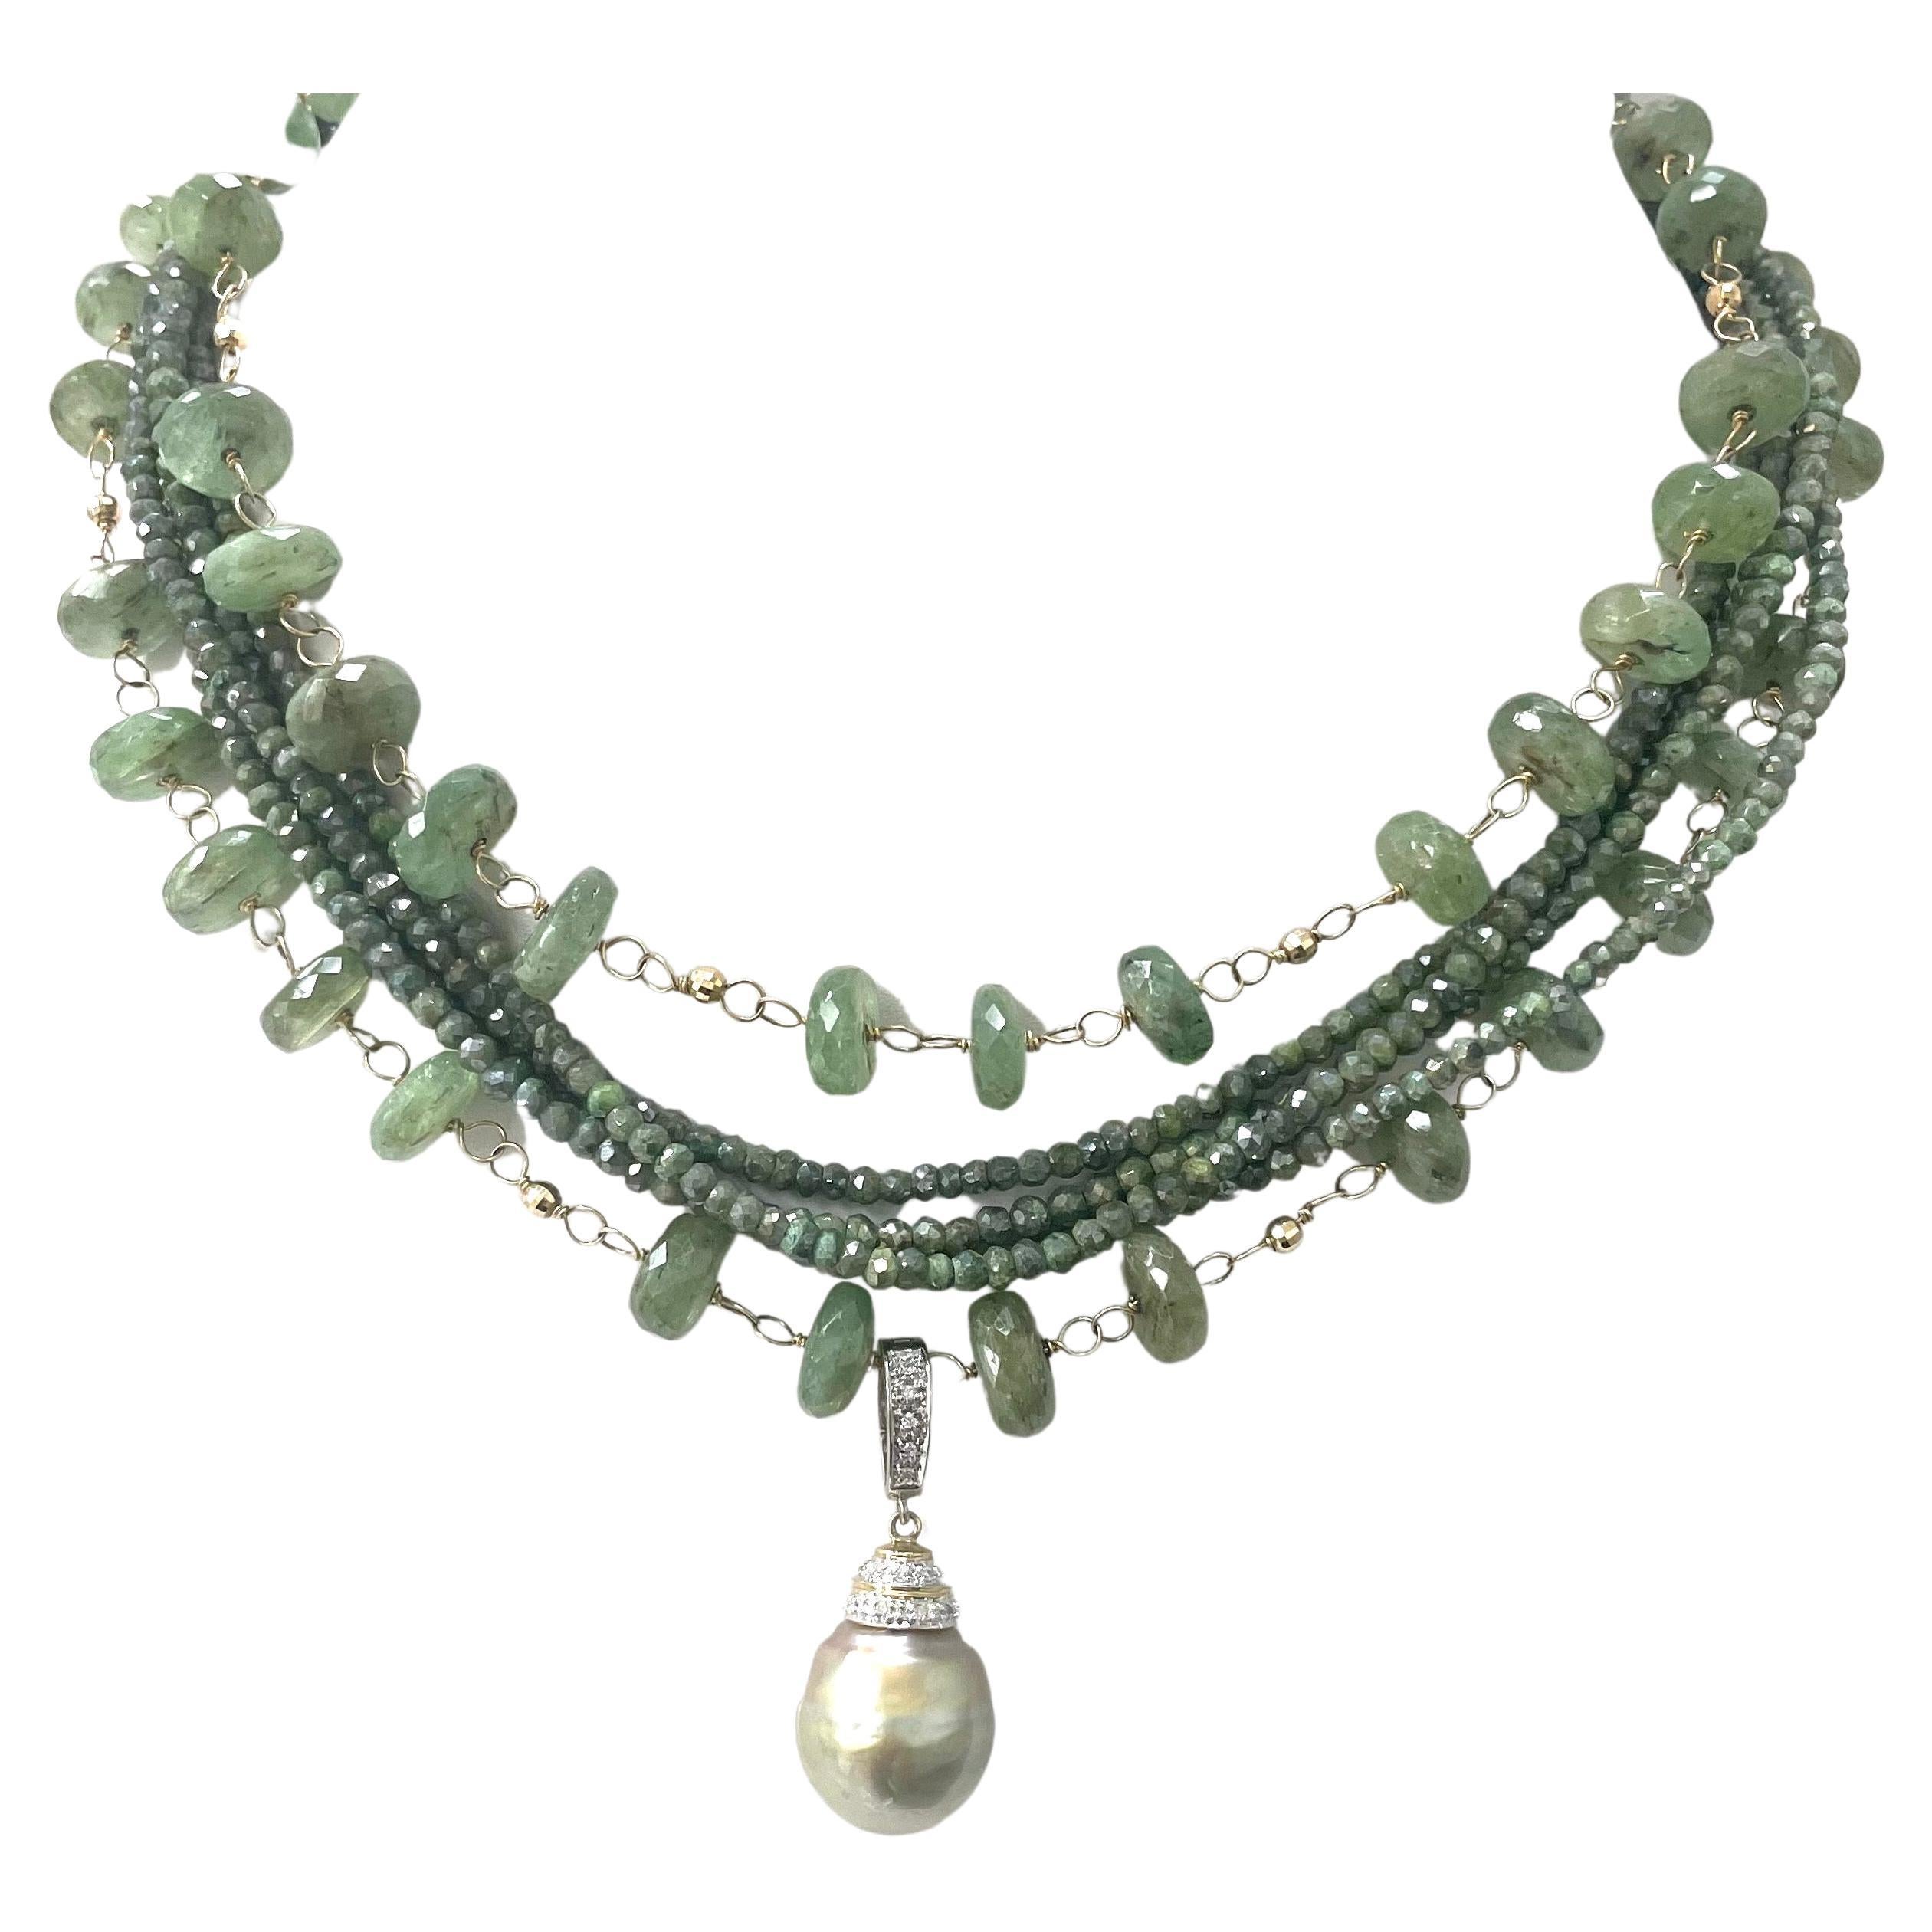 Green Kyanite and Silverite Multistrand Paradizia Necklace with Tahitian Pendant For Sale 2